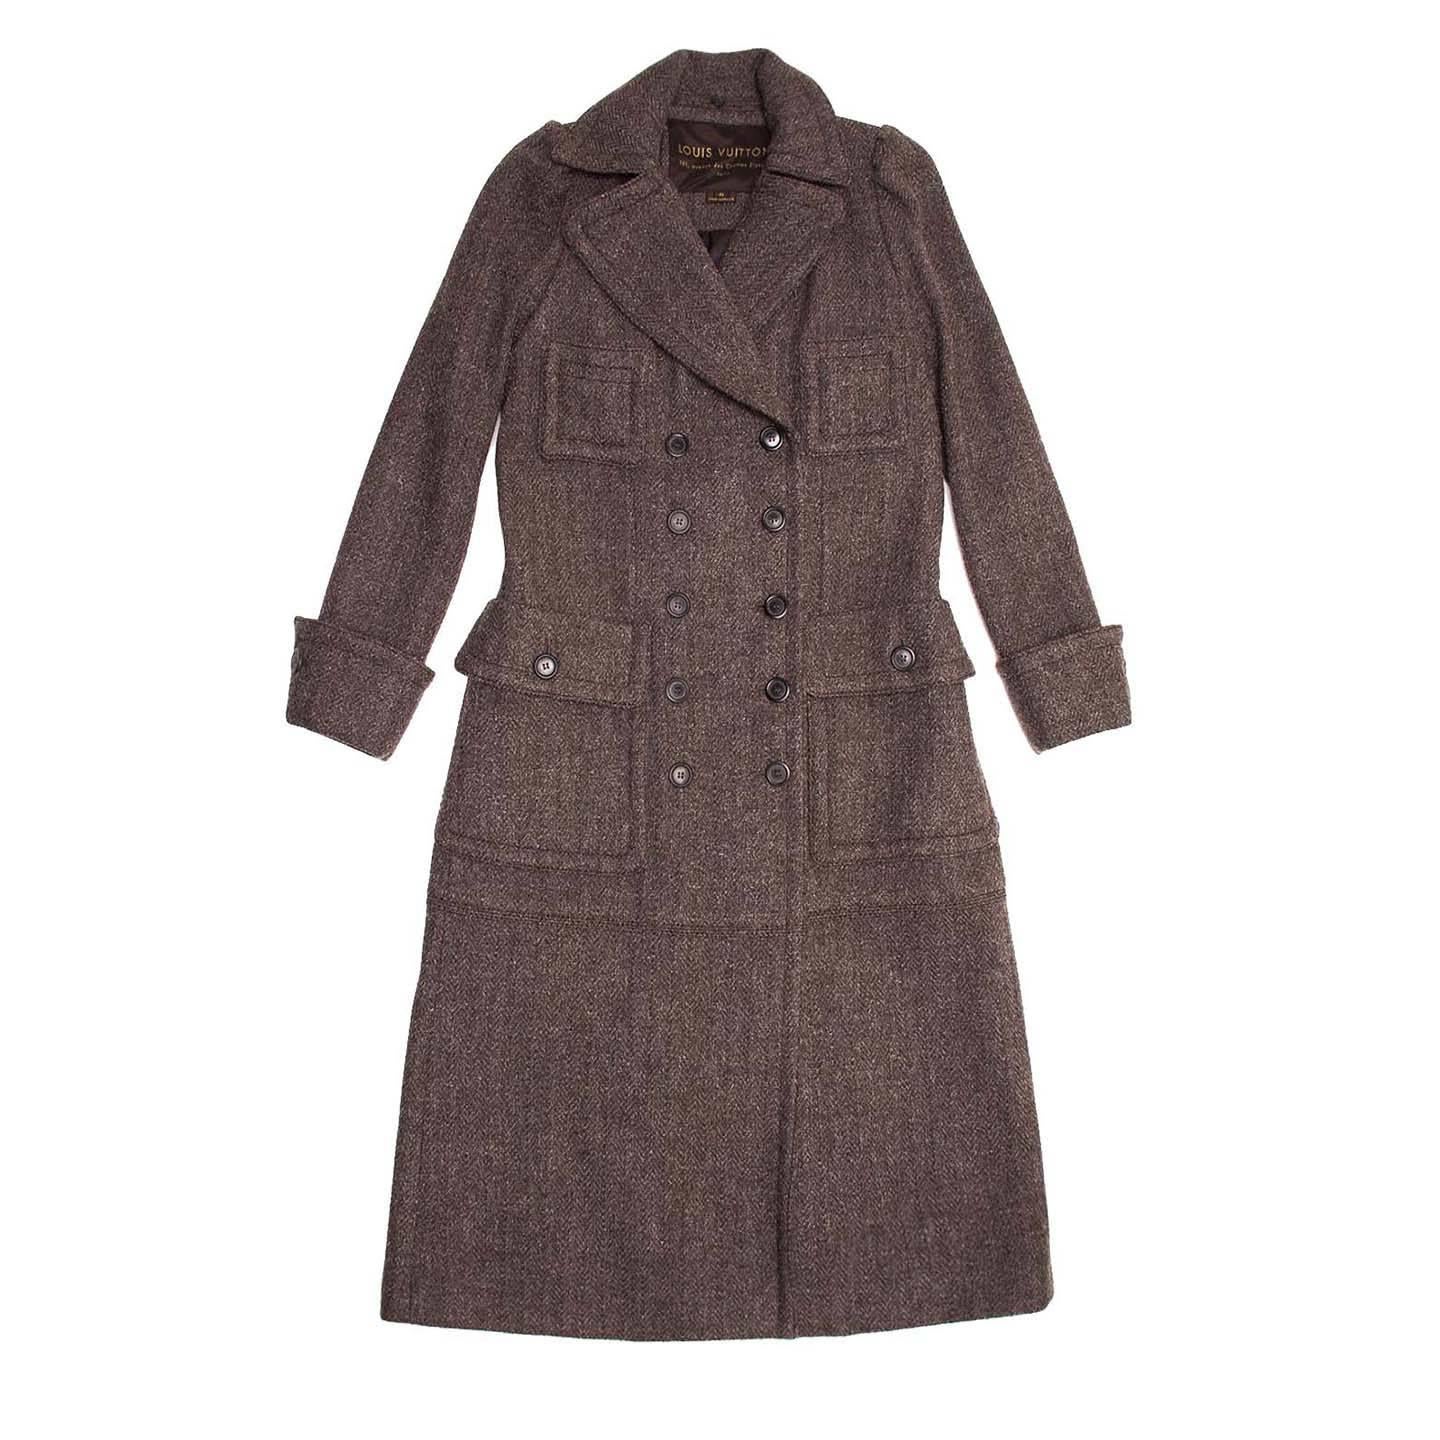 Long double breasted grey/brown coat with silver threads waved in the wool tweed fabric. The lower patch pockets are big and close with flaps and round buttons, while two small square patch pockets embellish the top part. The cuffs have wide